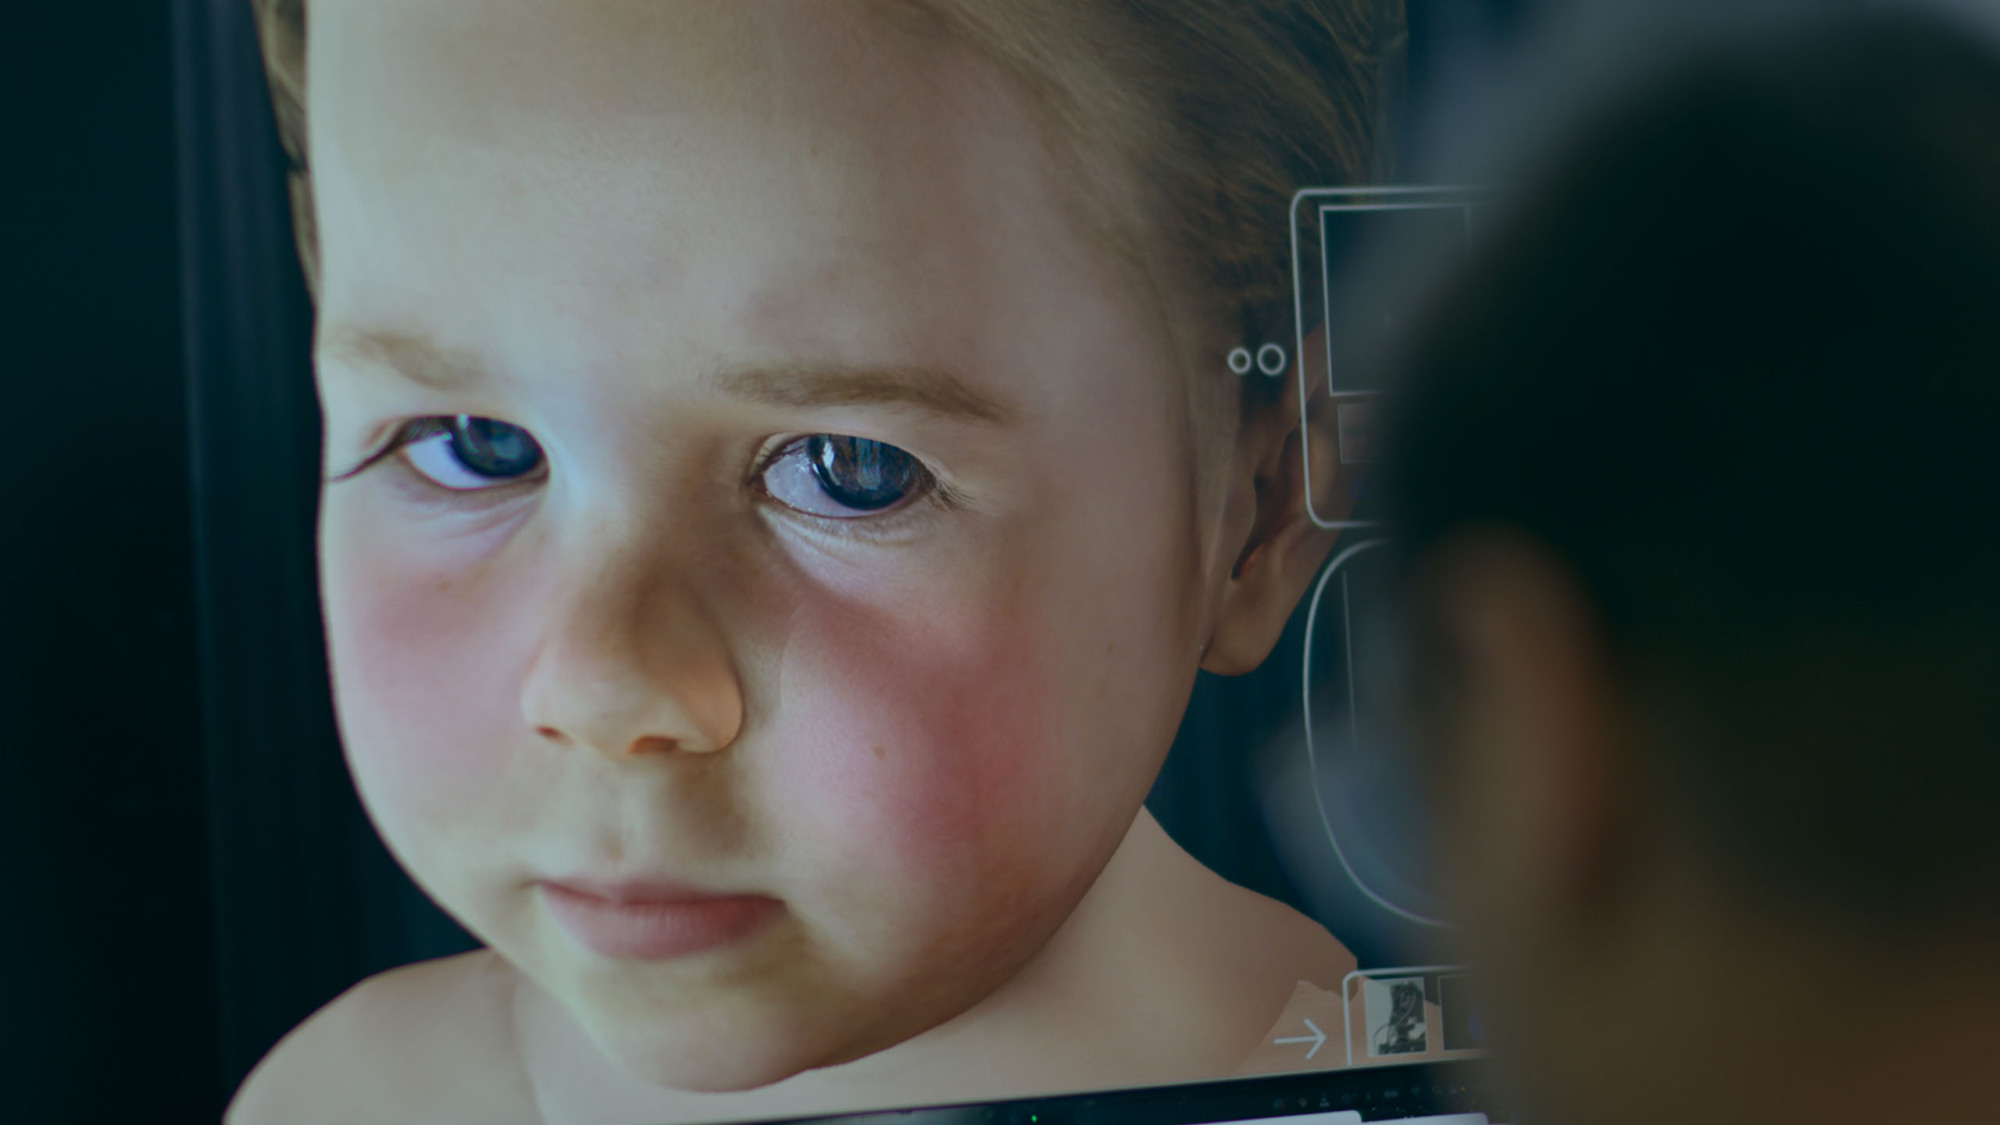 A virtual baby looks upset in "Eternal You."